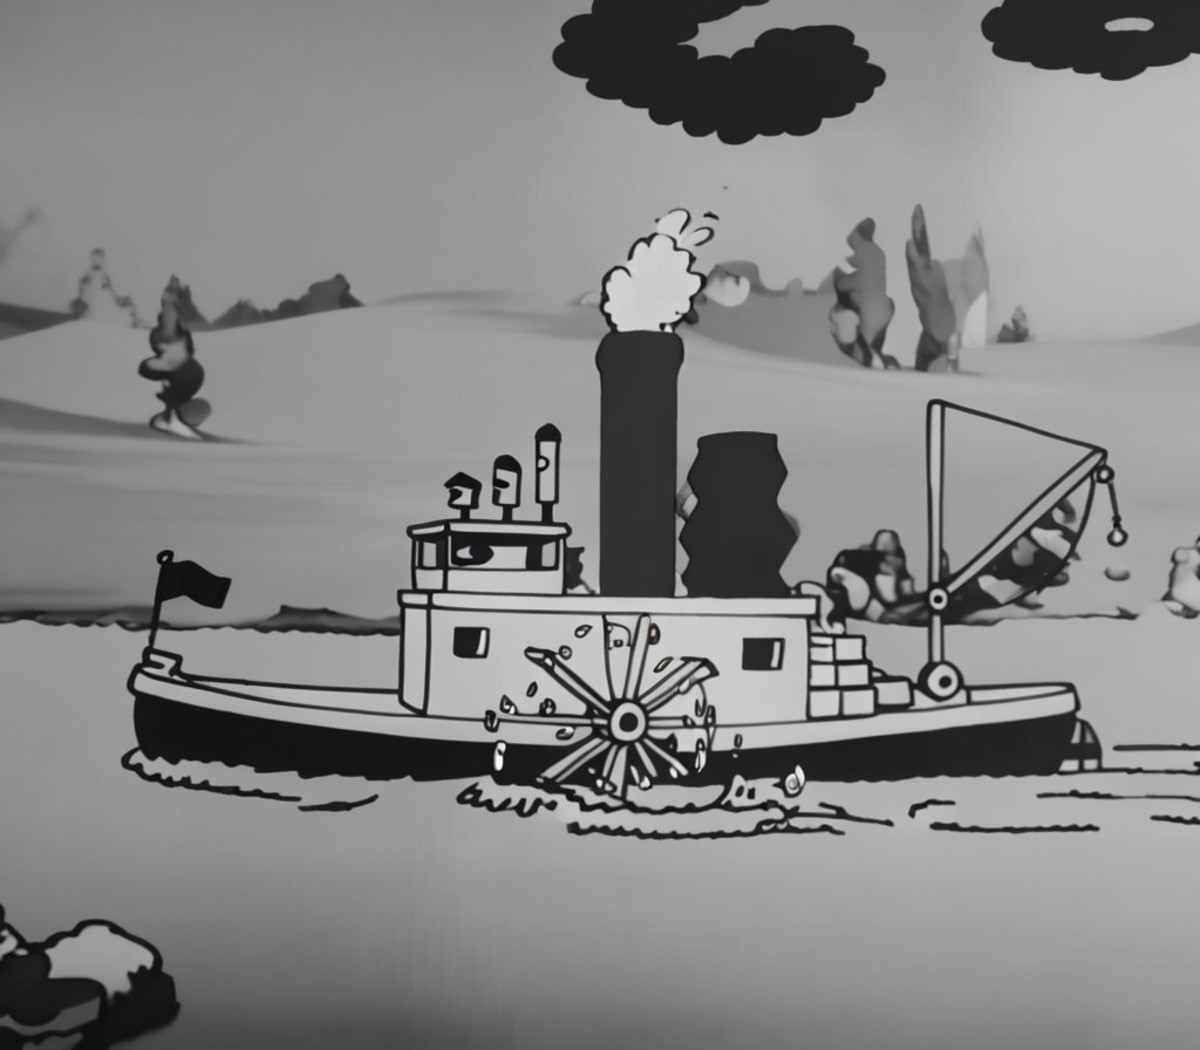 1920s animation, steamboat willie sailing on a river, scenery at background, rings of smoke coming from smokestack, waves
...